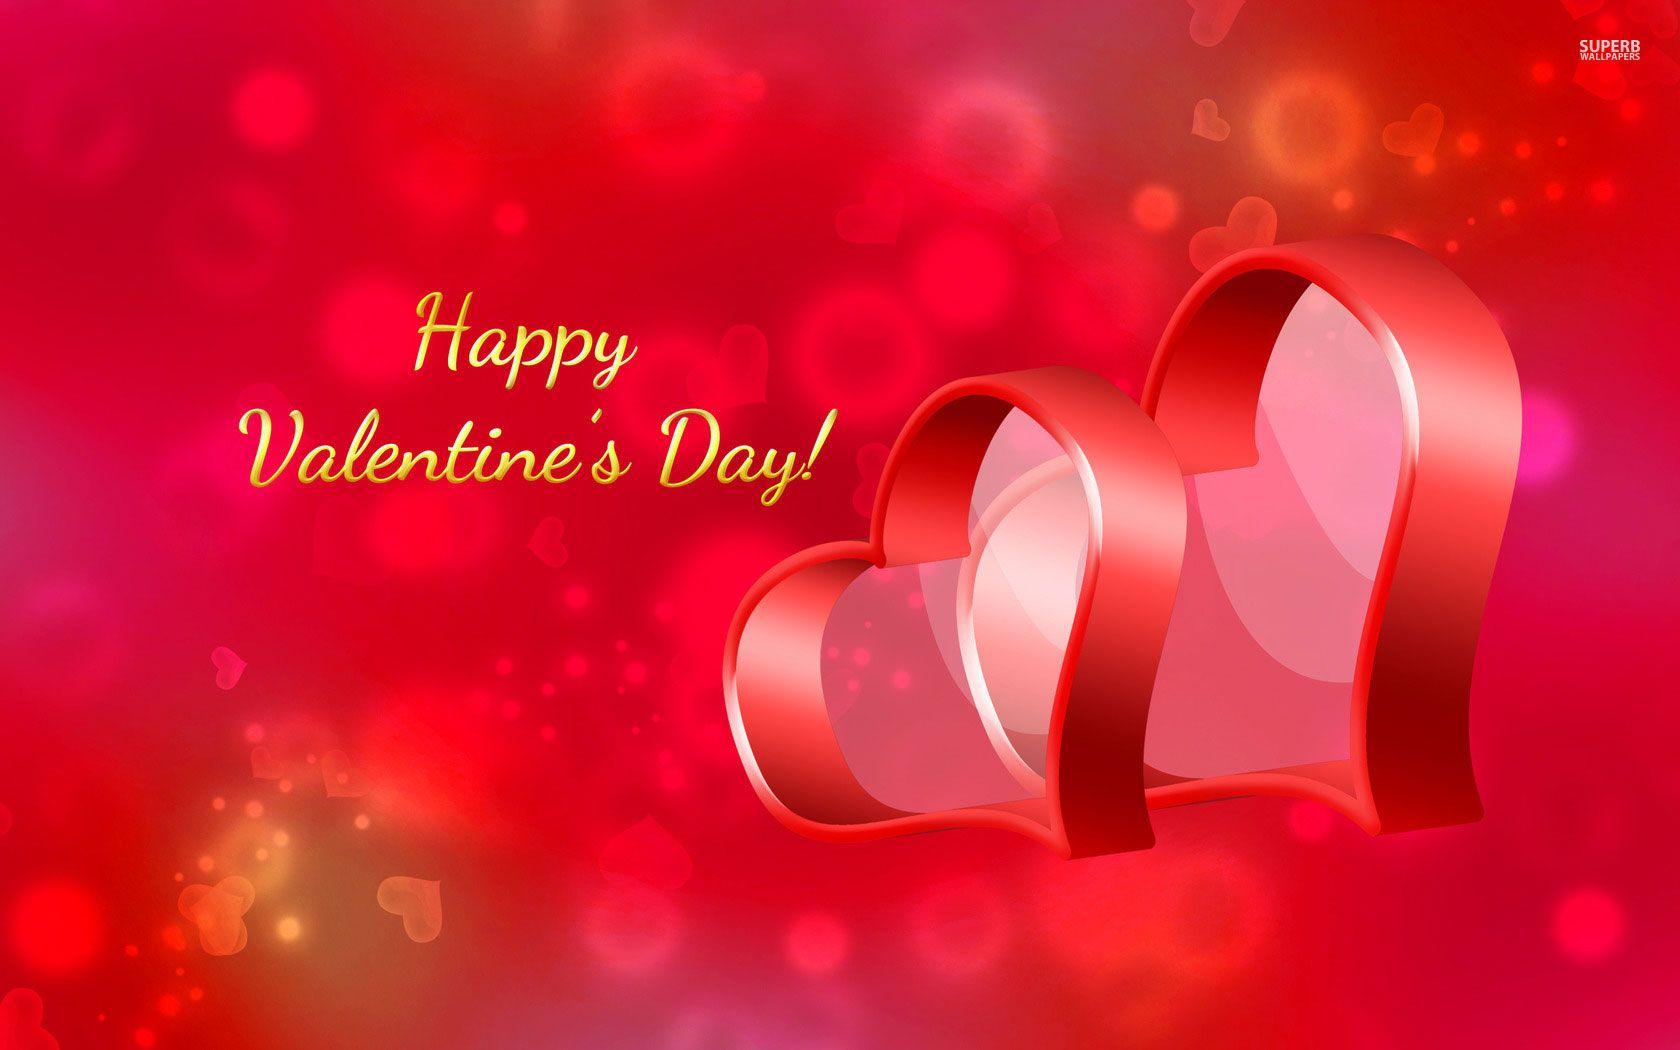 Romantic Valentines Day Wallpaper and HD Image